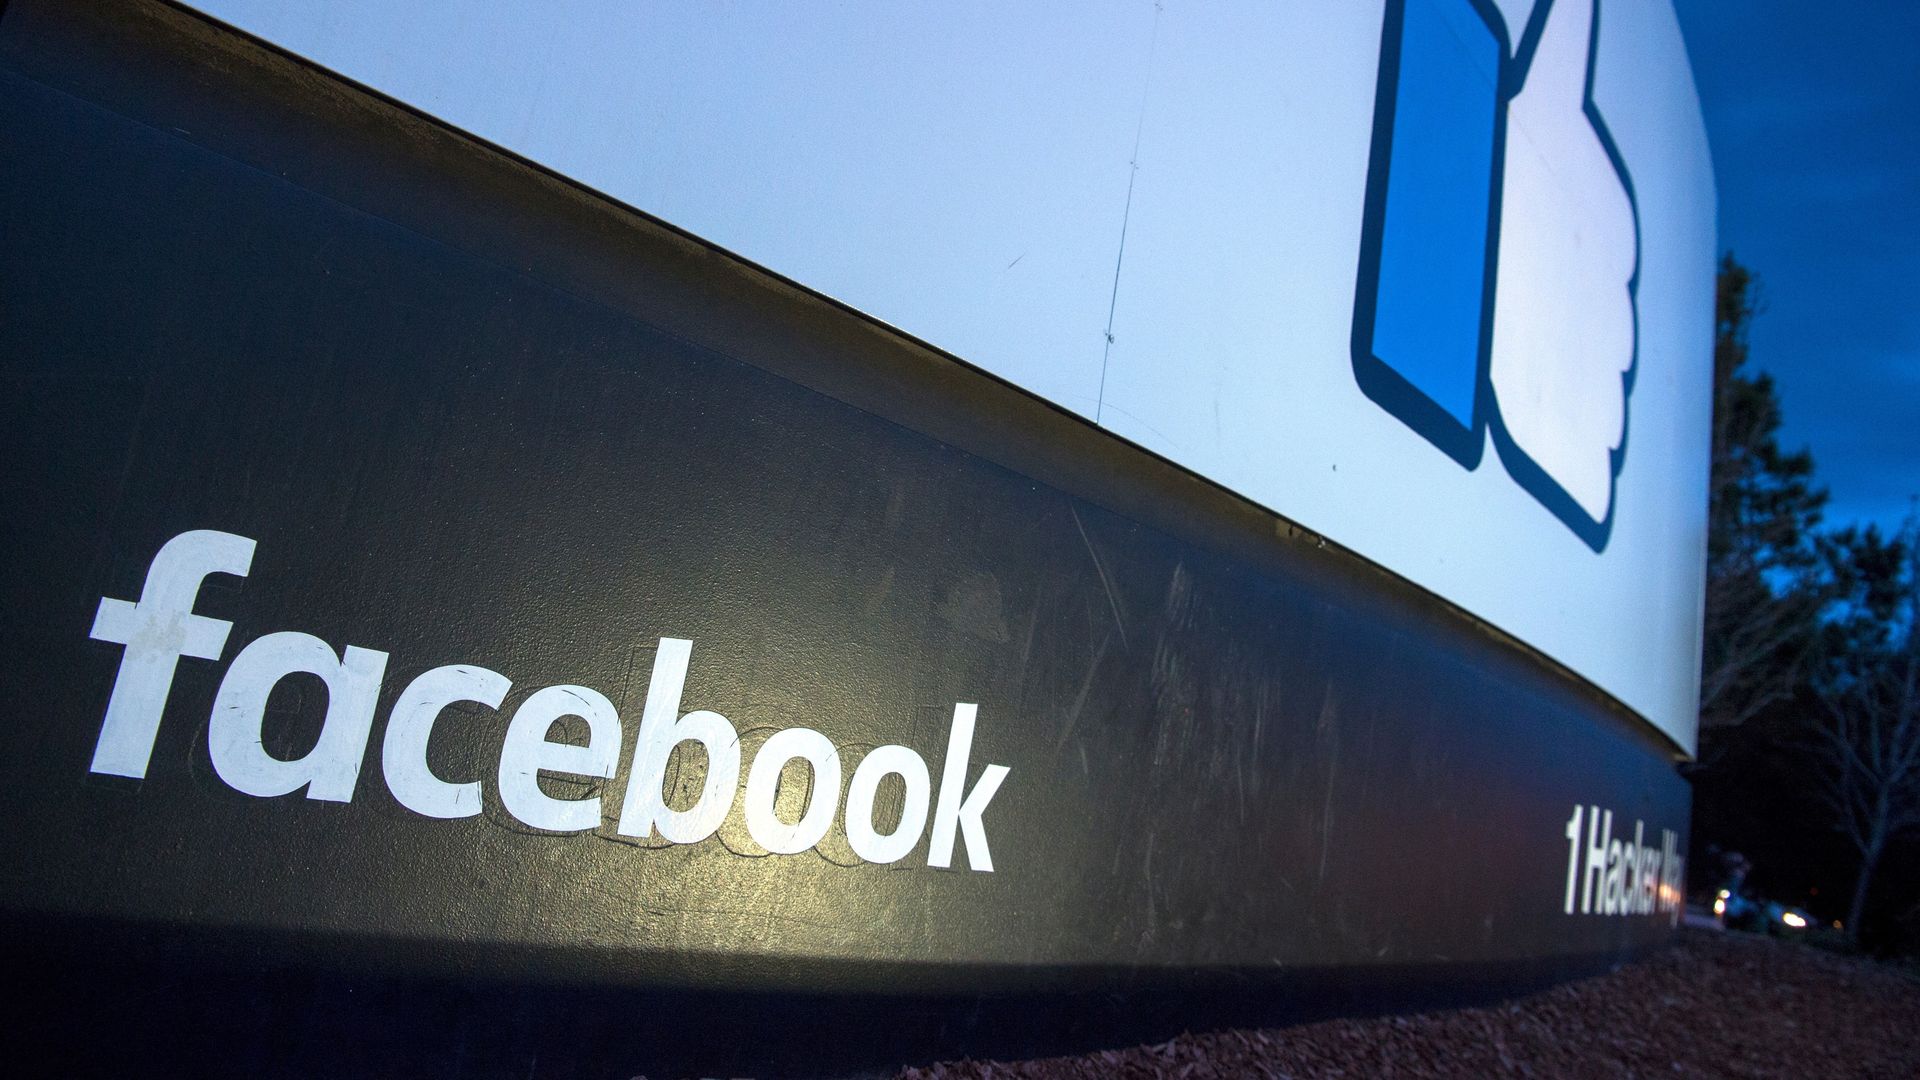 An angled-up photo of the "thumbs up" sign outside Facebook HQ at night